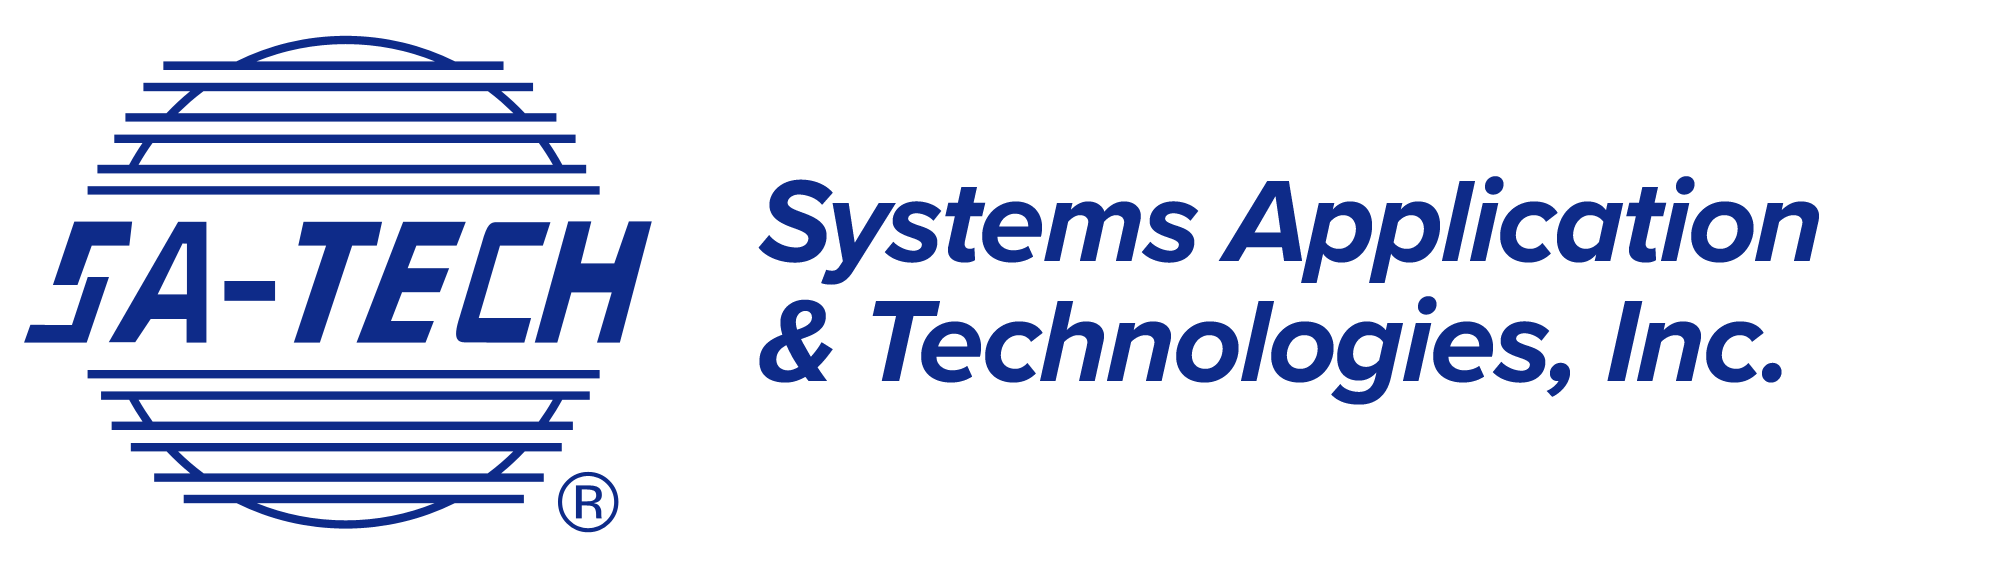  Systems Application & Technologies, Inc